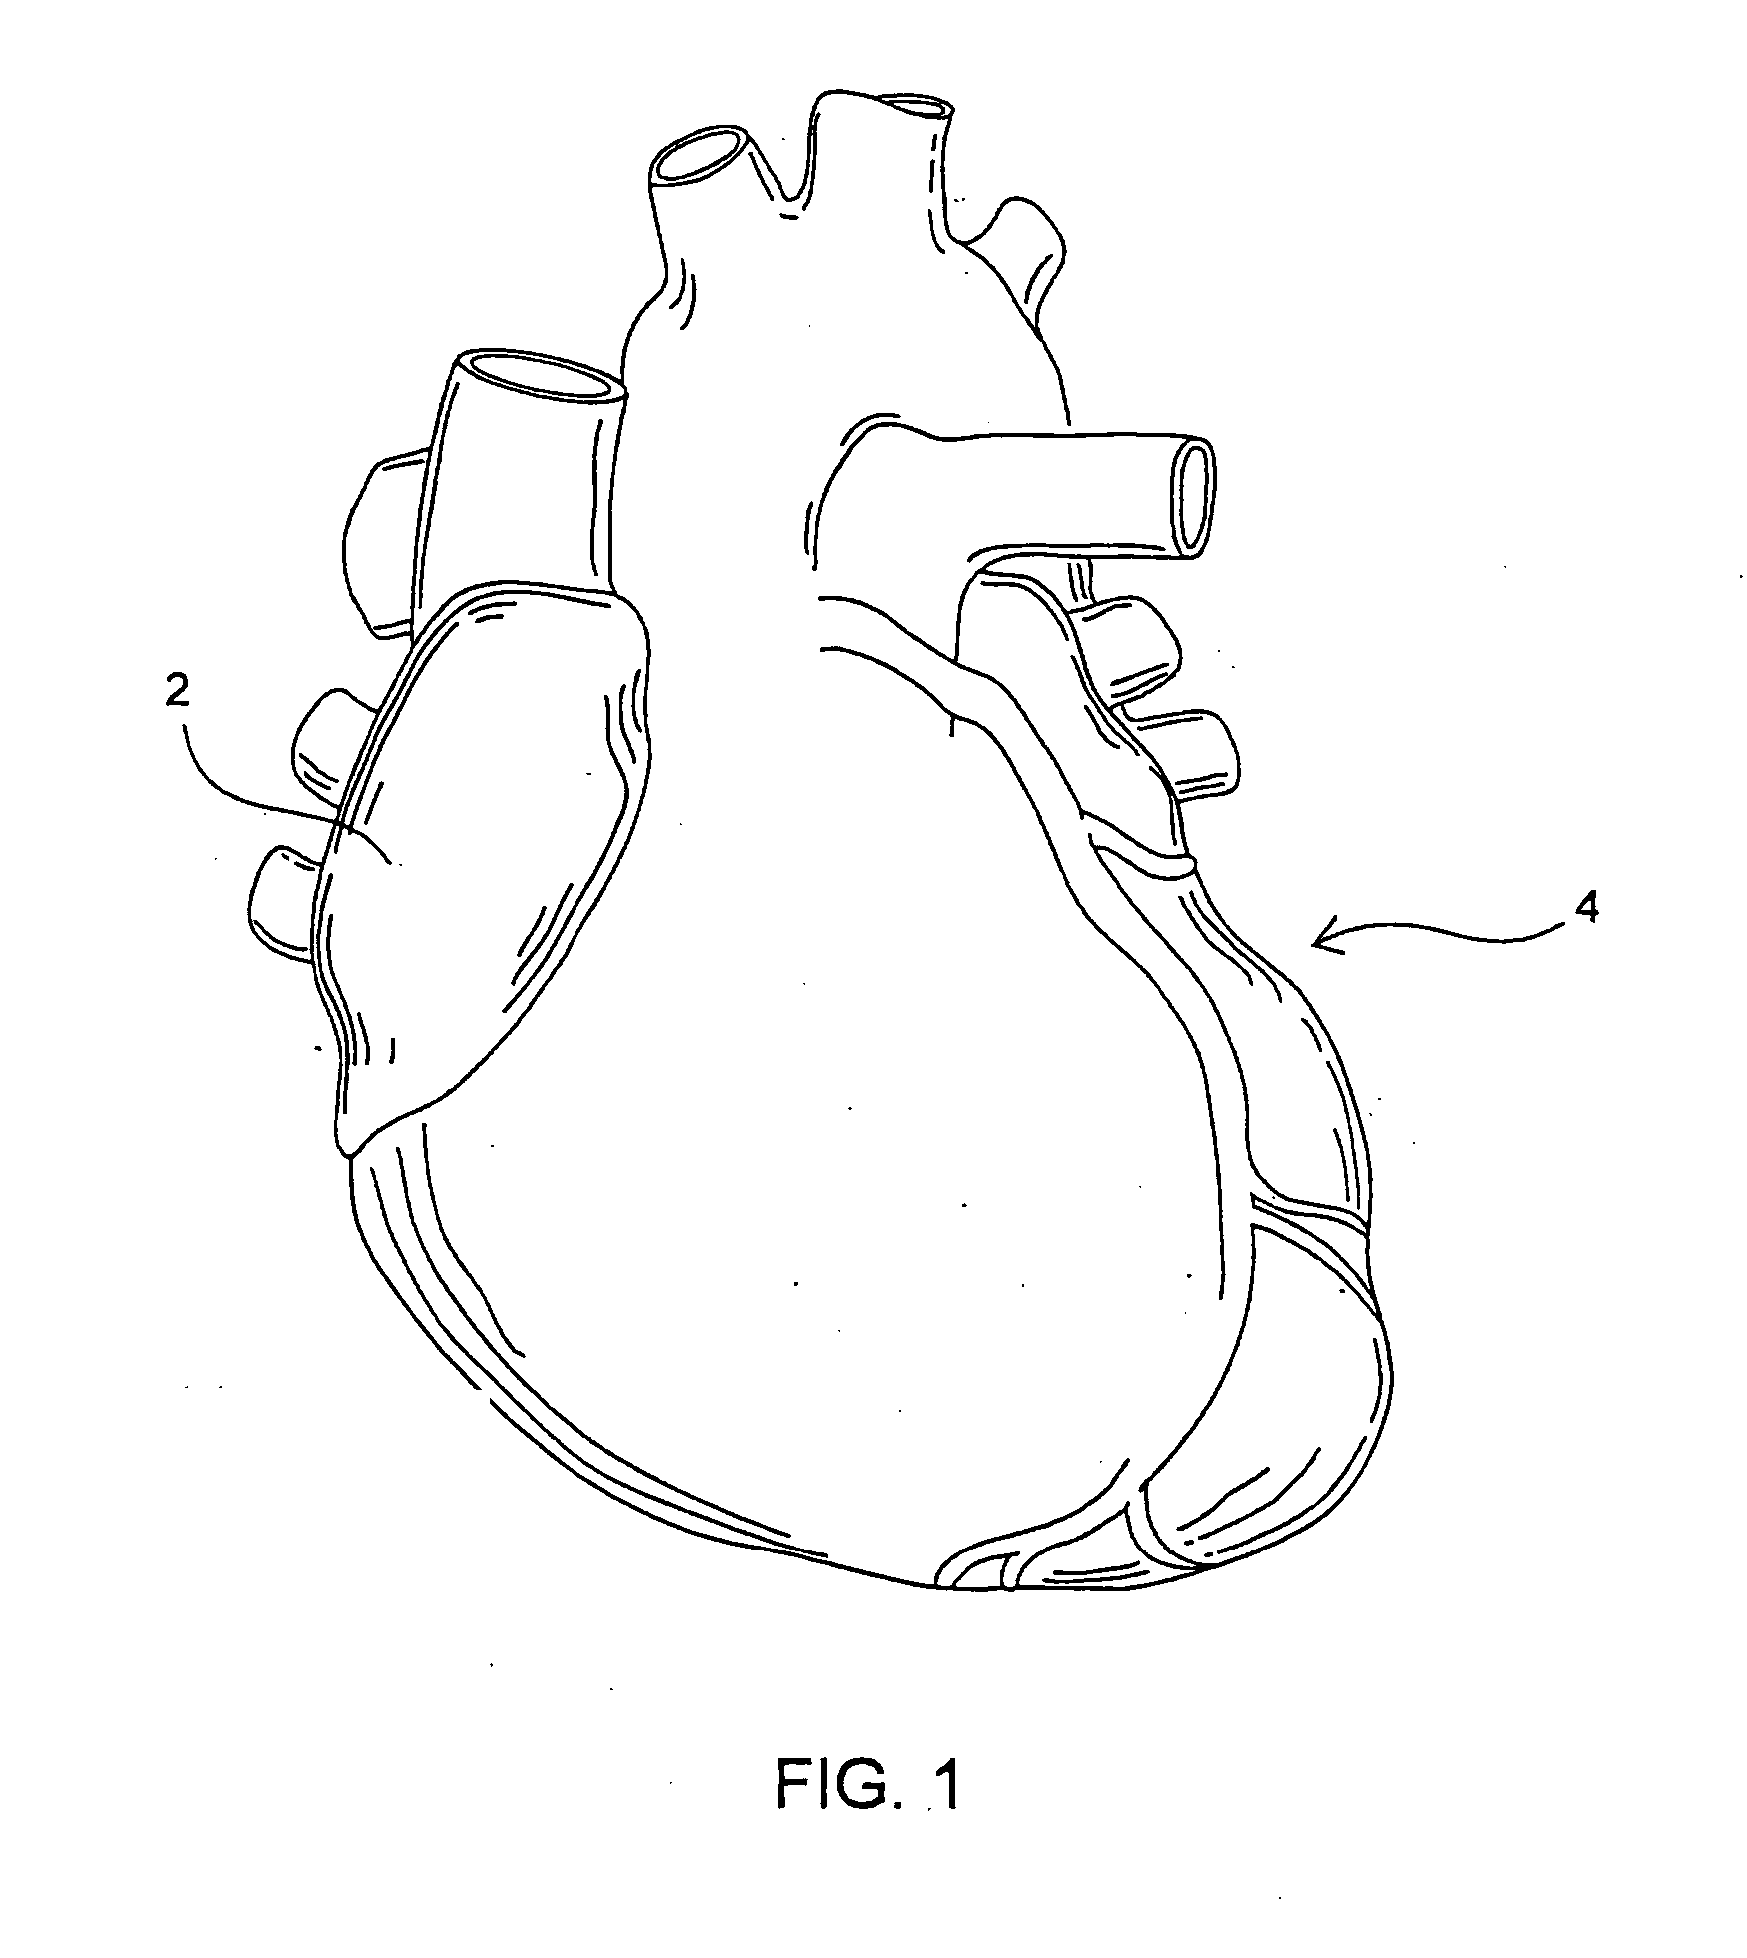 Pass-through restraint electrolytic implant delivery systems